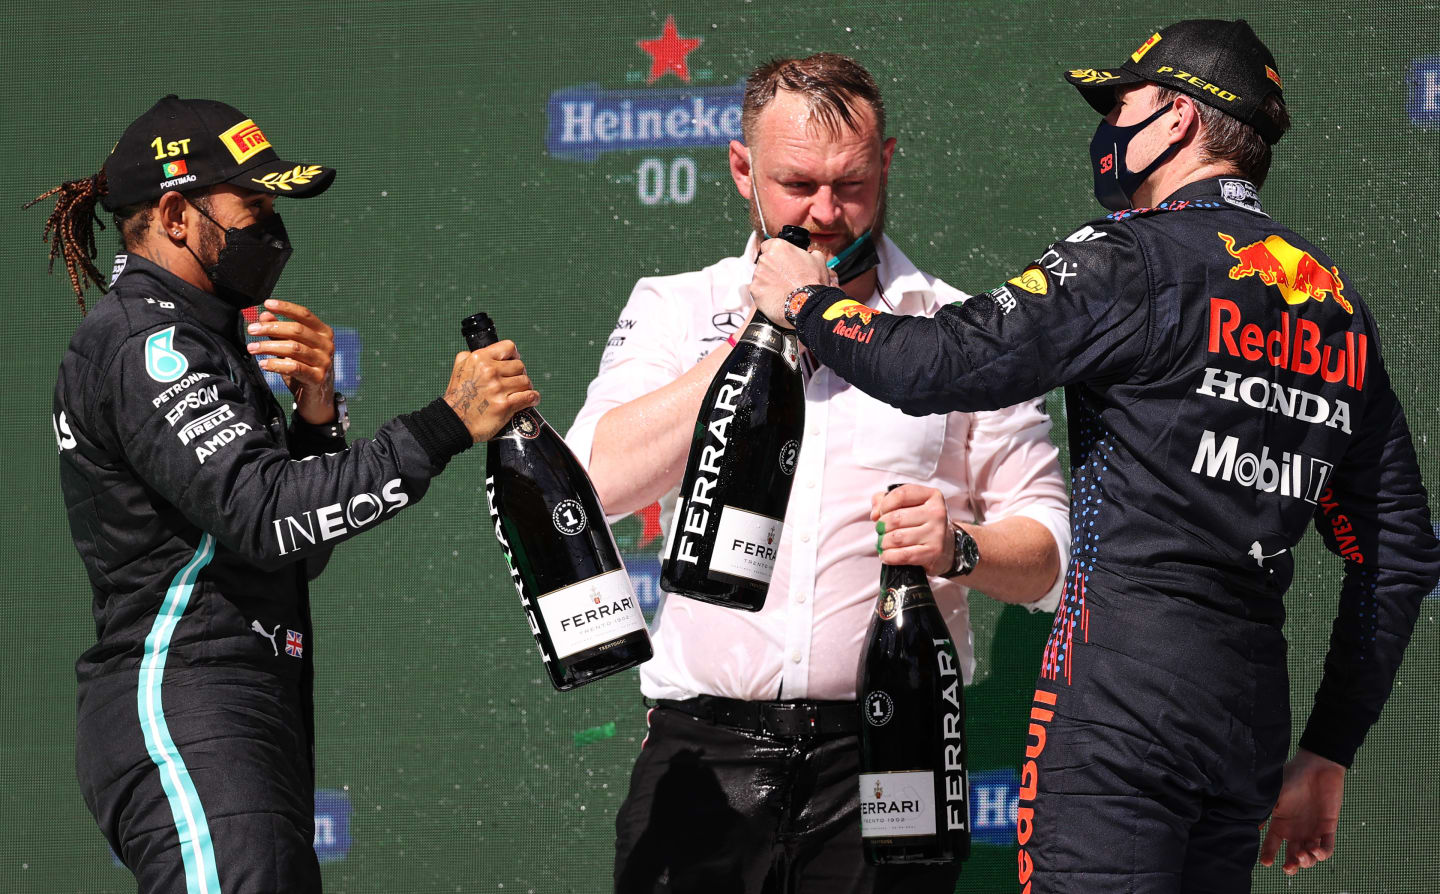 PORTIMAO, PORTUGAL - MAY 02: Race winner Lewis Hamilton of Great Britain and Mercedes GP, Mercedes GP engineer Kane Hemmant and Second placed Max Verstappen of Netherlands and Red Bull Racing  celebrate with Sparkling wine on the podium during the F1 Grand Prix of Portugal at Autodromo Internacional Do Algarve on May 02, 2021 in Portimao, Portugal. (Photo by Lars Baron/Getty Images)